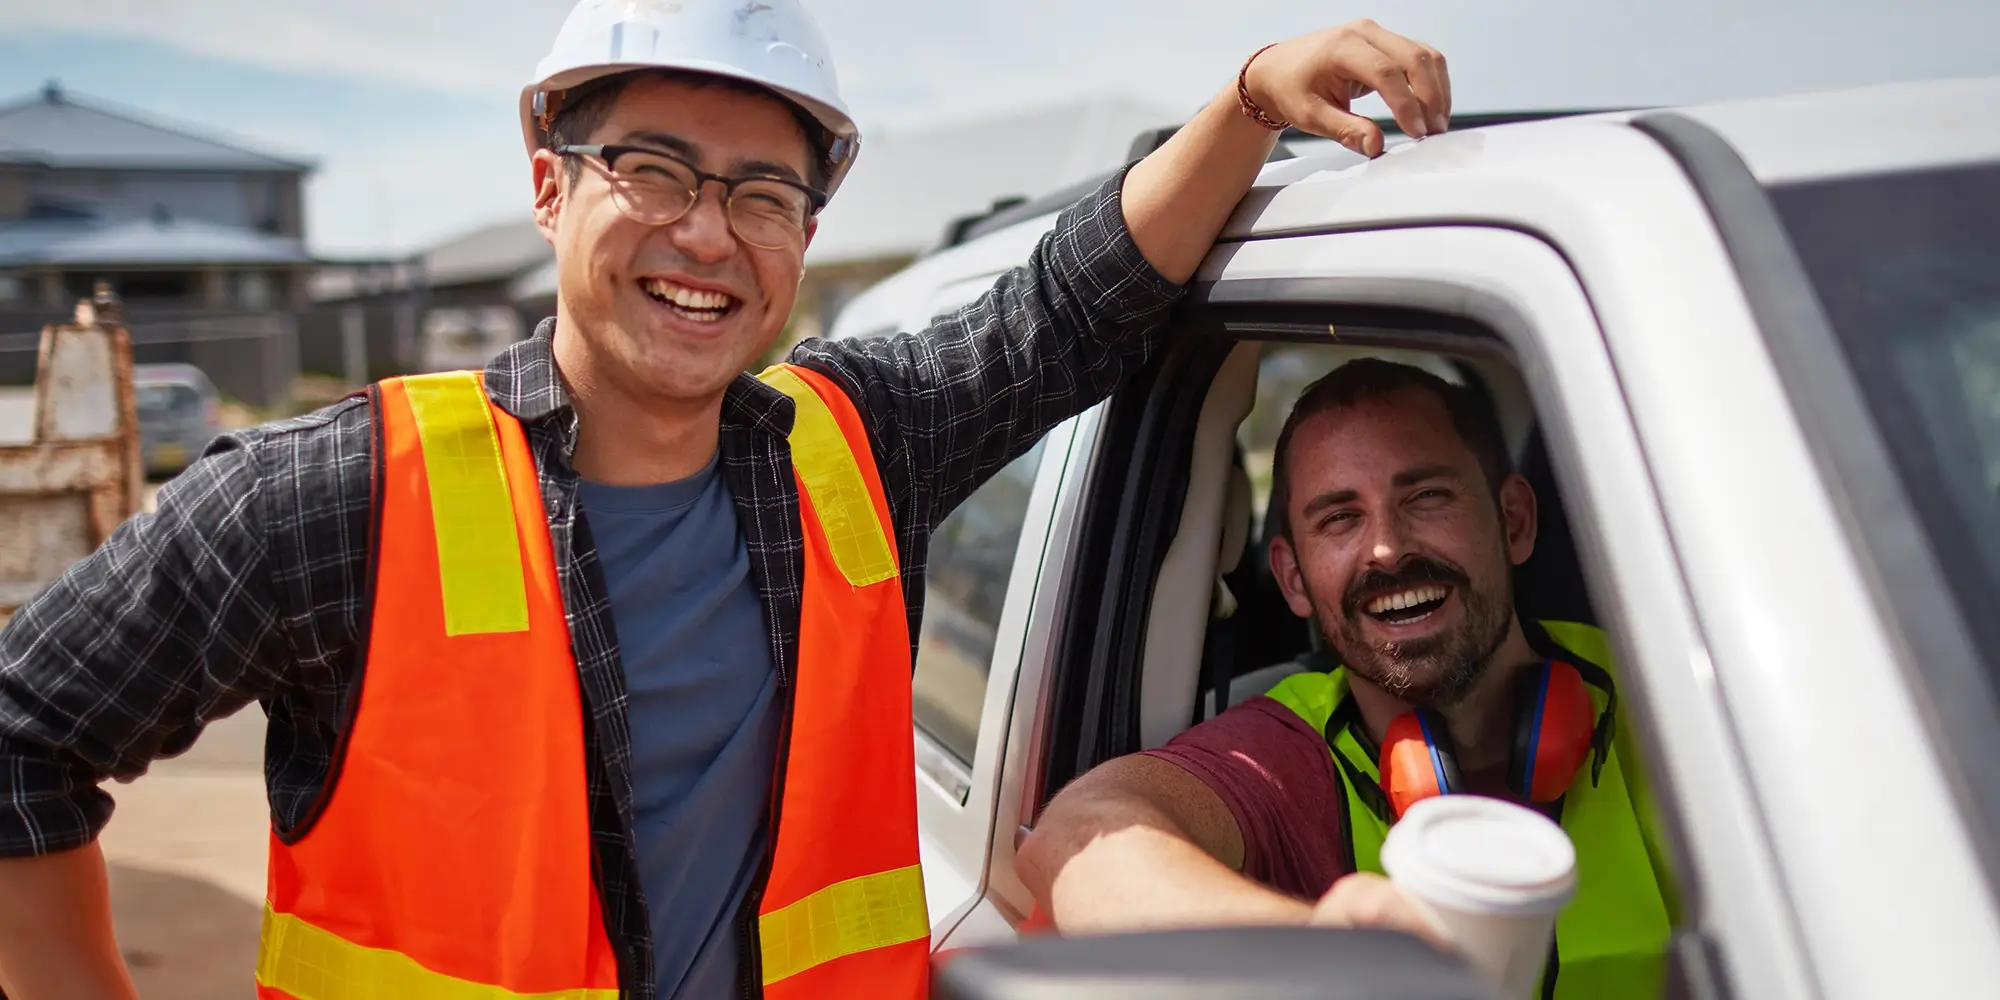 two contractors smiling, one sitting in truck holding coffee while the other is outside the truck